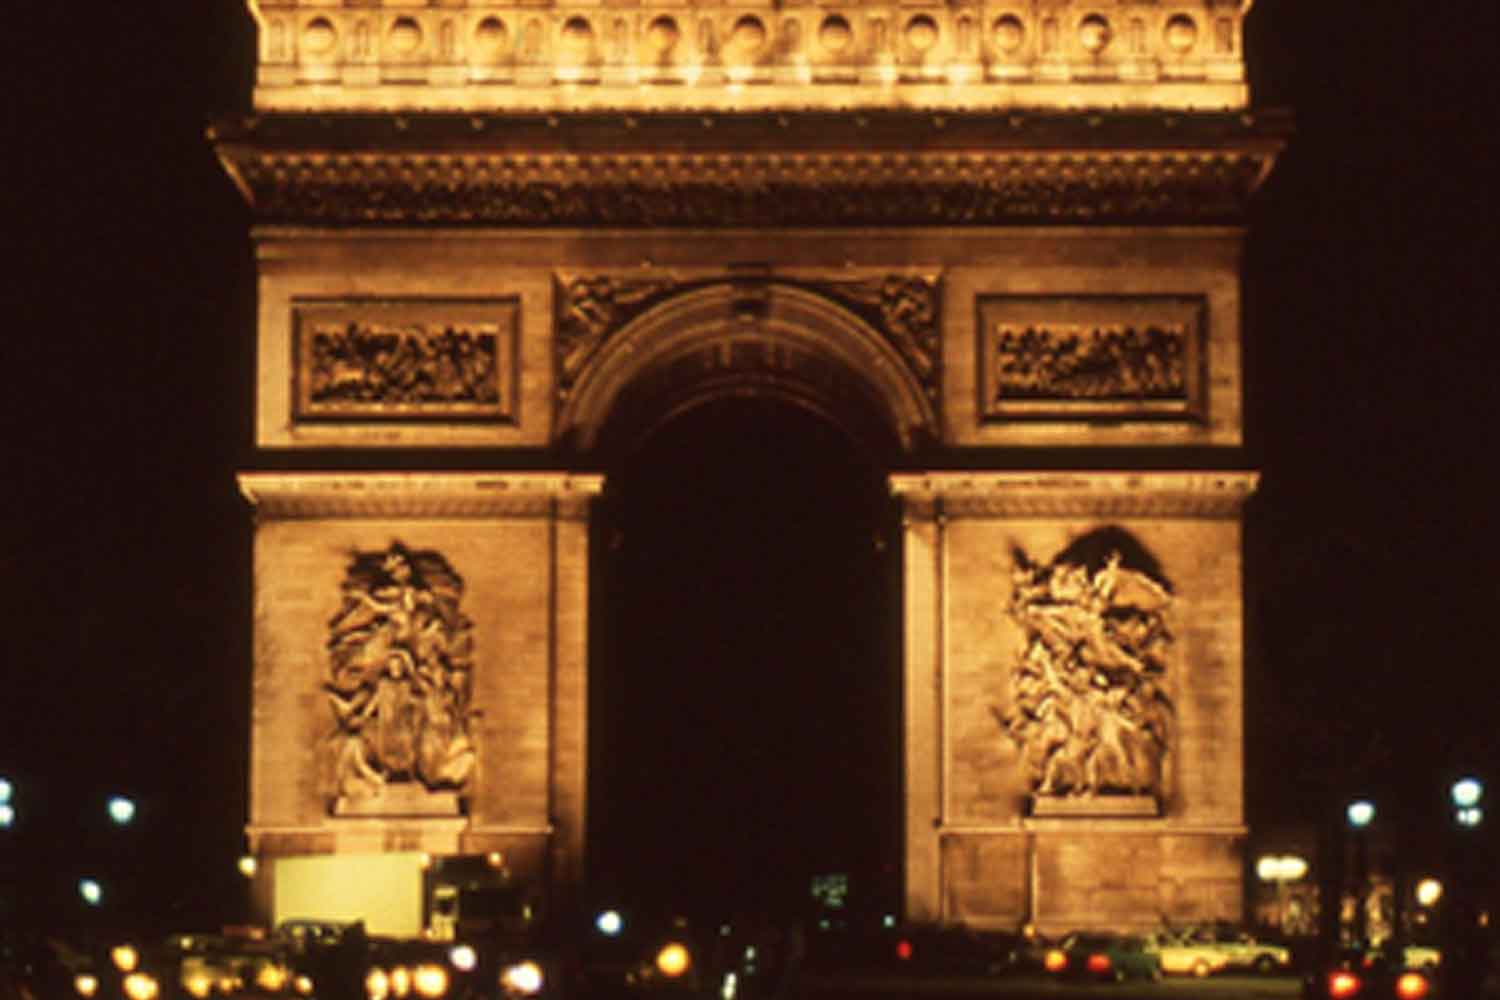 Photo of the Arc de Triomphe lit up at night. Large rectangular, decorated with reliefs and a large arched opening in the center through which traffic can drive.